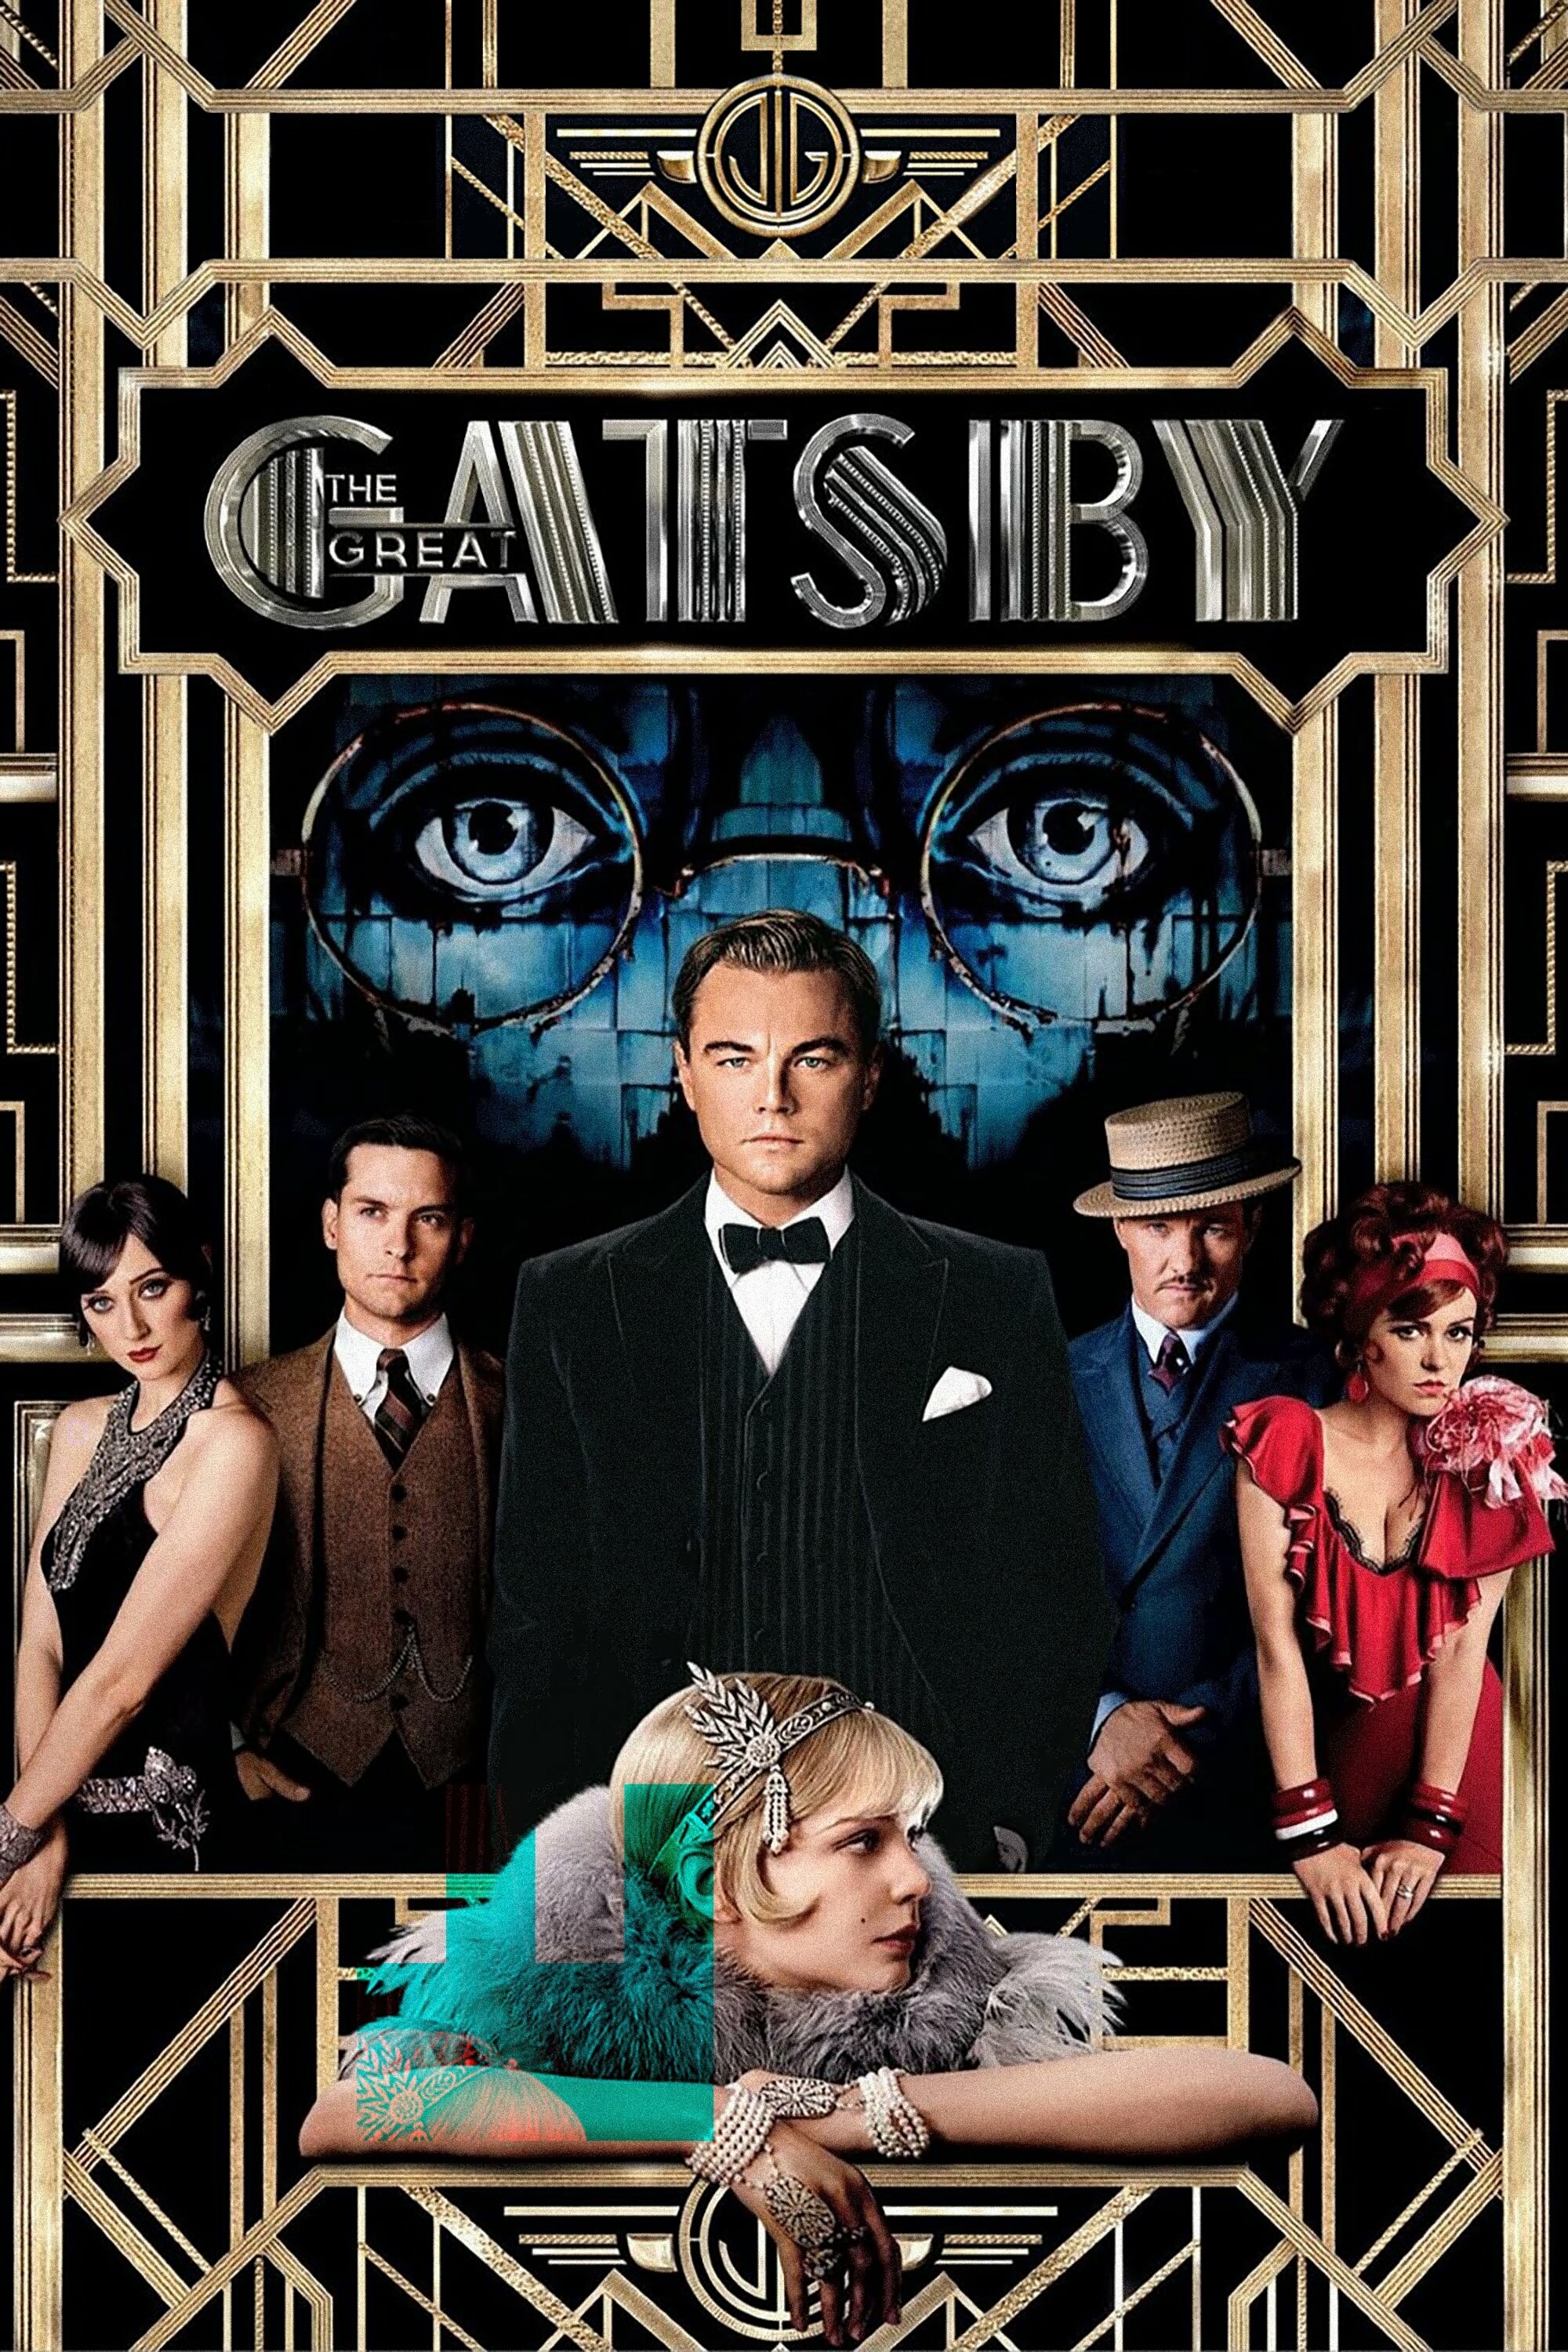 The Great Gatsby: The film follows the life and times of millionaire Jay Gatsby and his neighbor Nick Carraway, Movie poster. 2000x3000 HD Background.